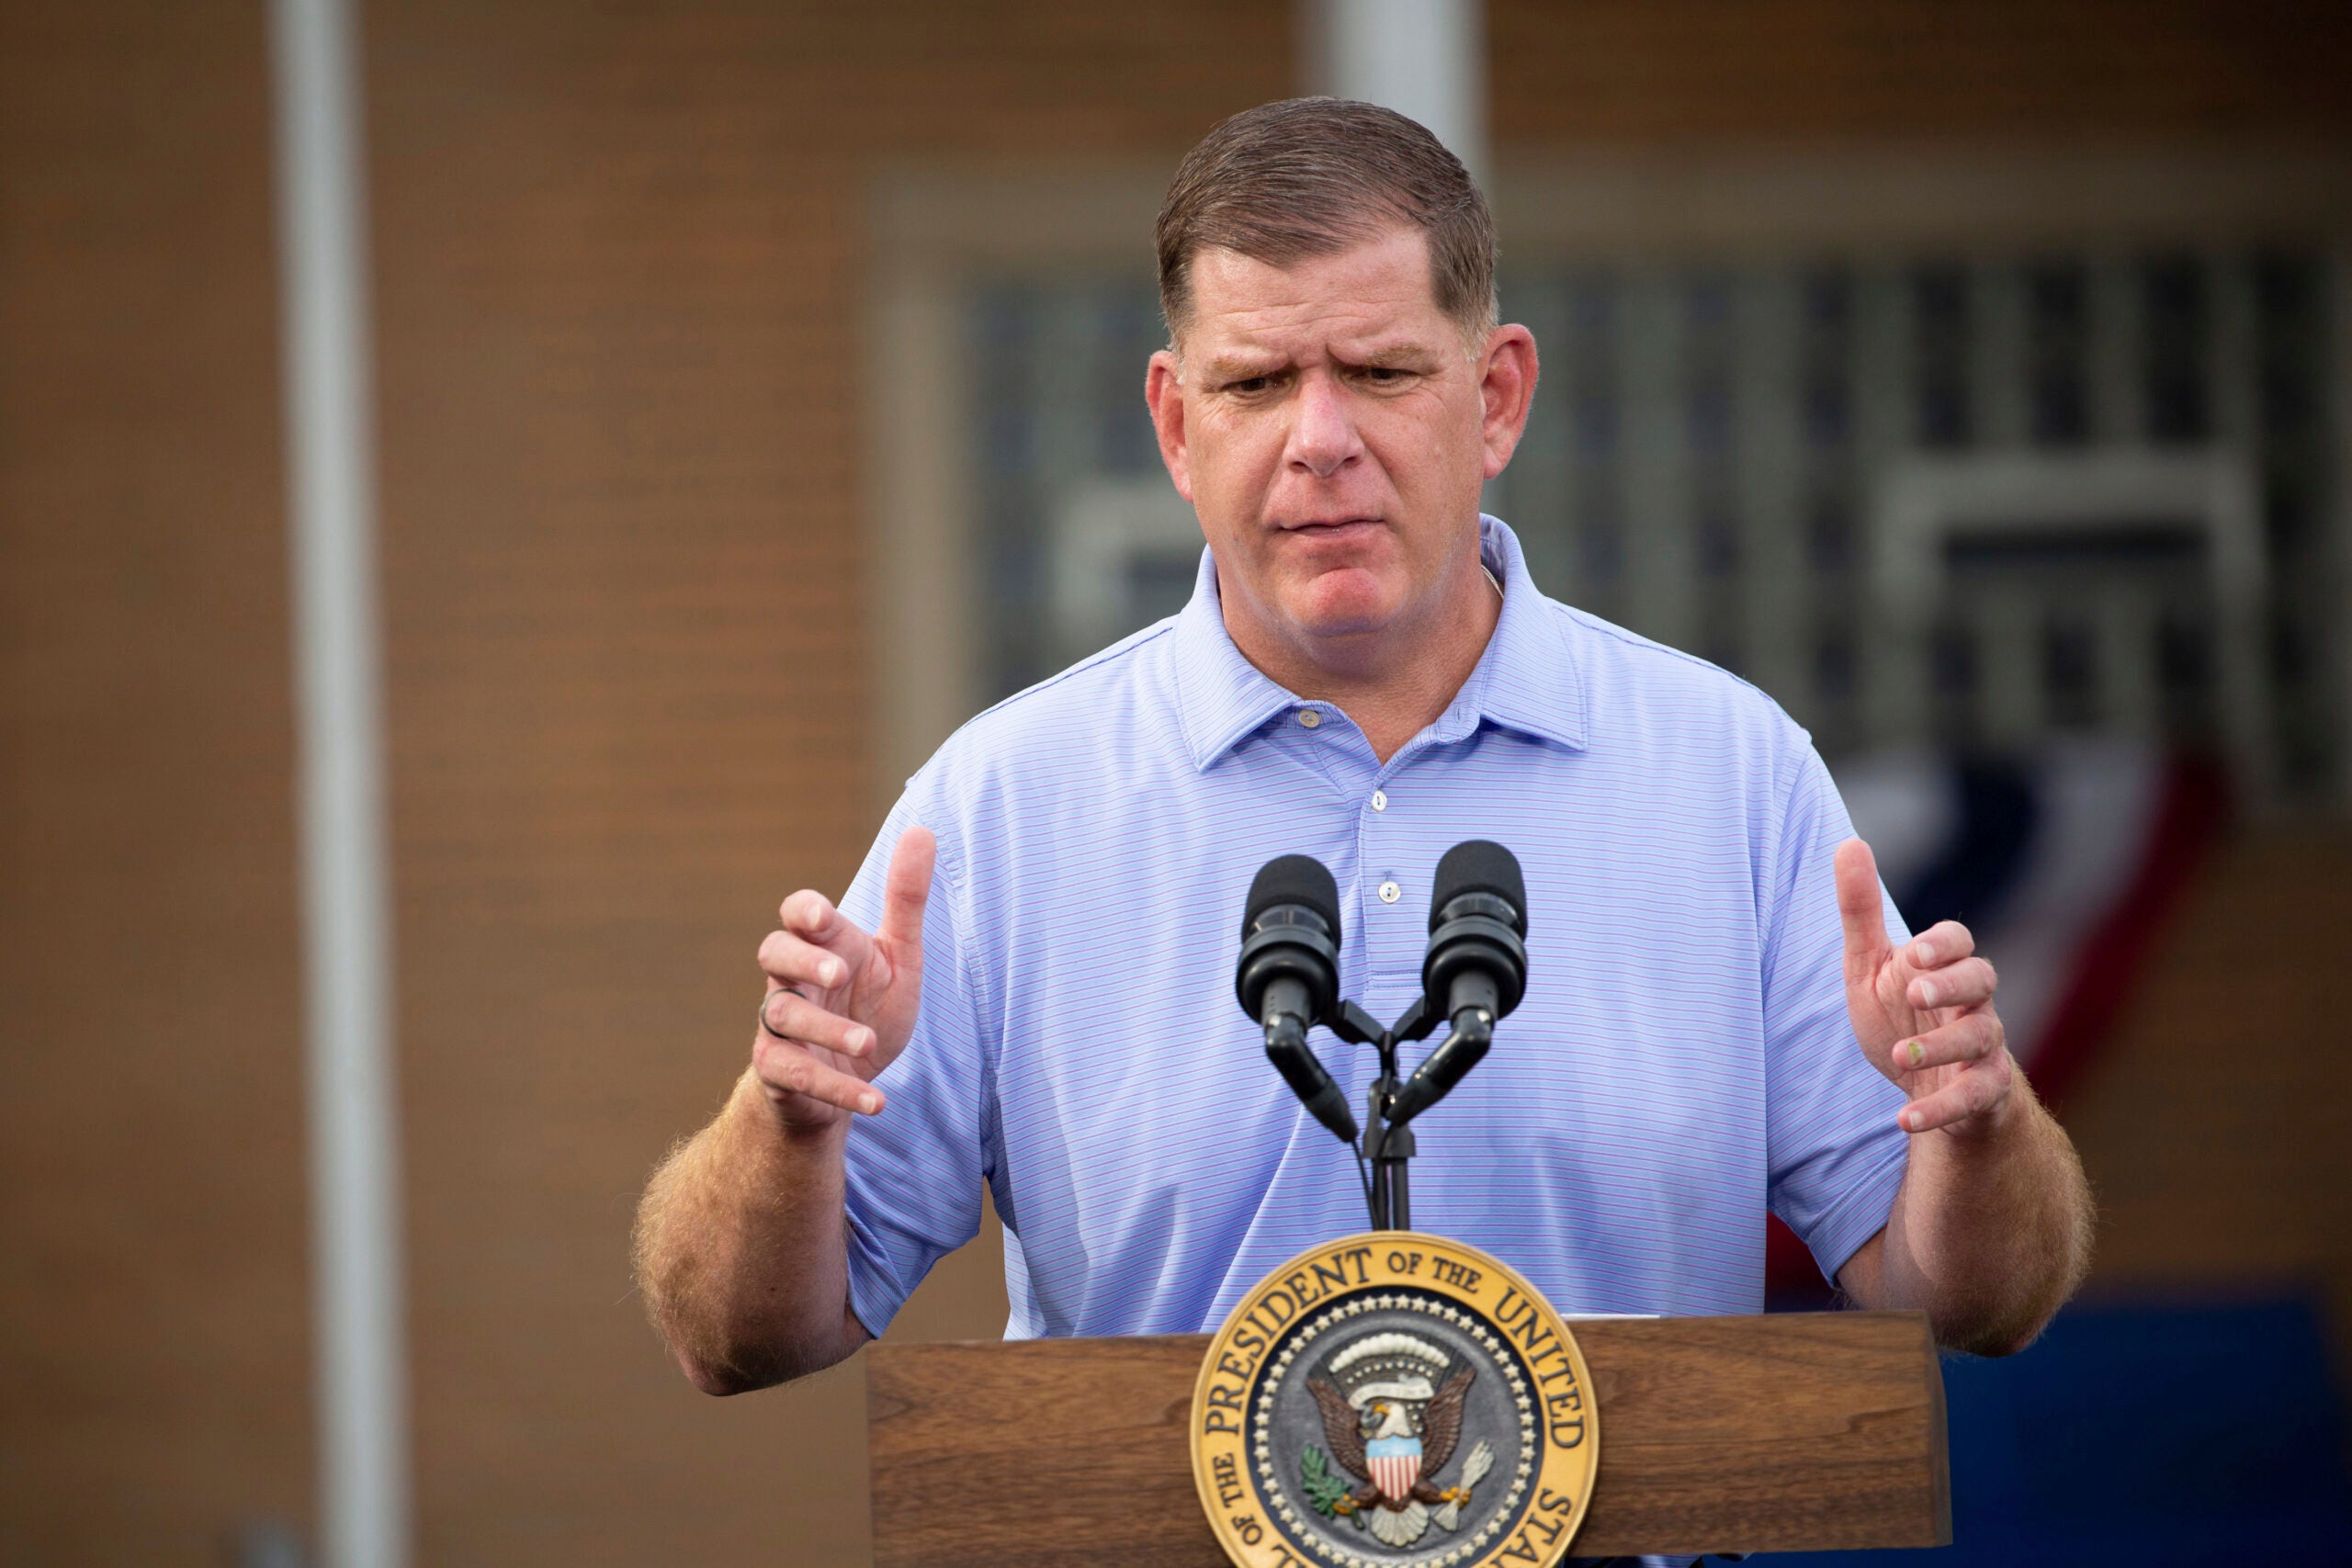 Secretary of Labor Marty Walsh speaks before President Joe Biden at a United Steel Workers of America Labor Day event in West Mifflin, Pennsylvania, Monday, Sept. 5, 2022.